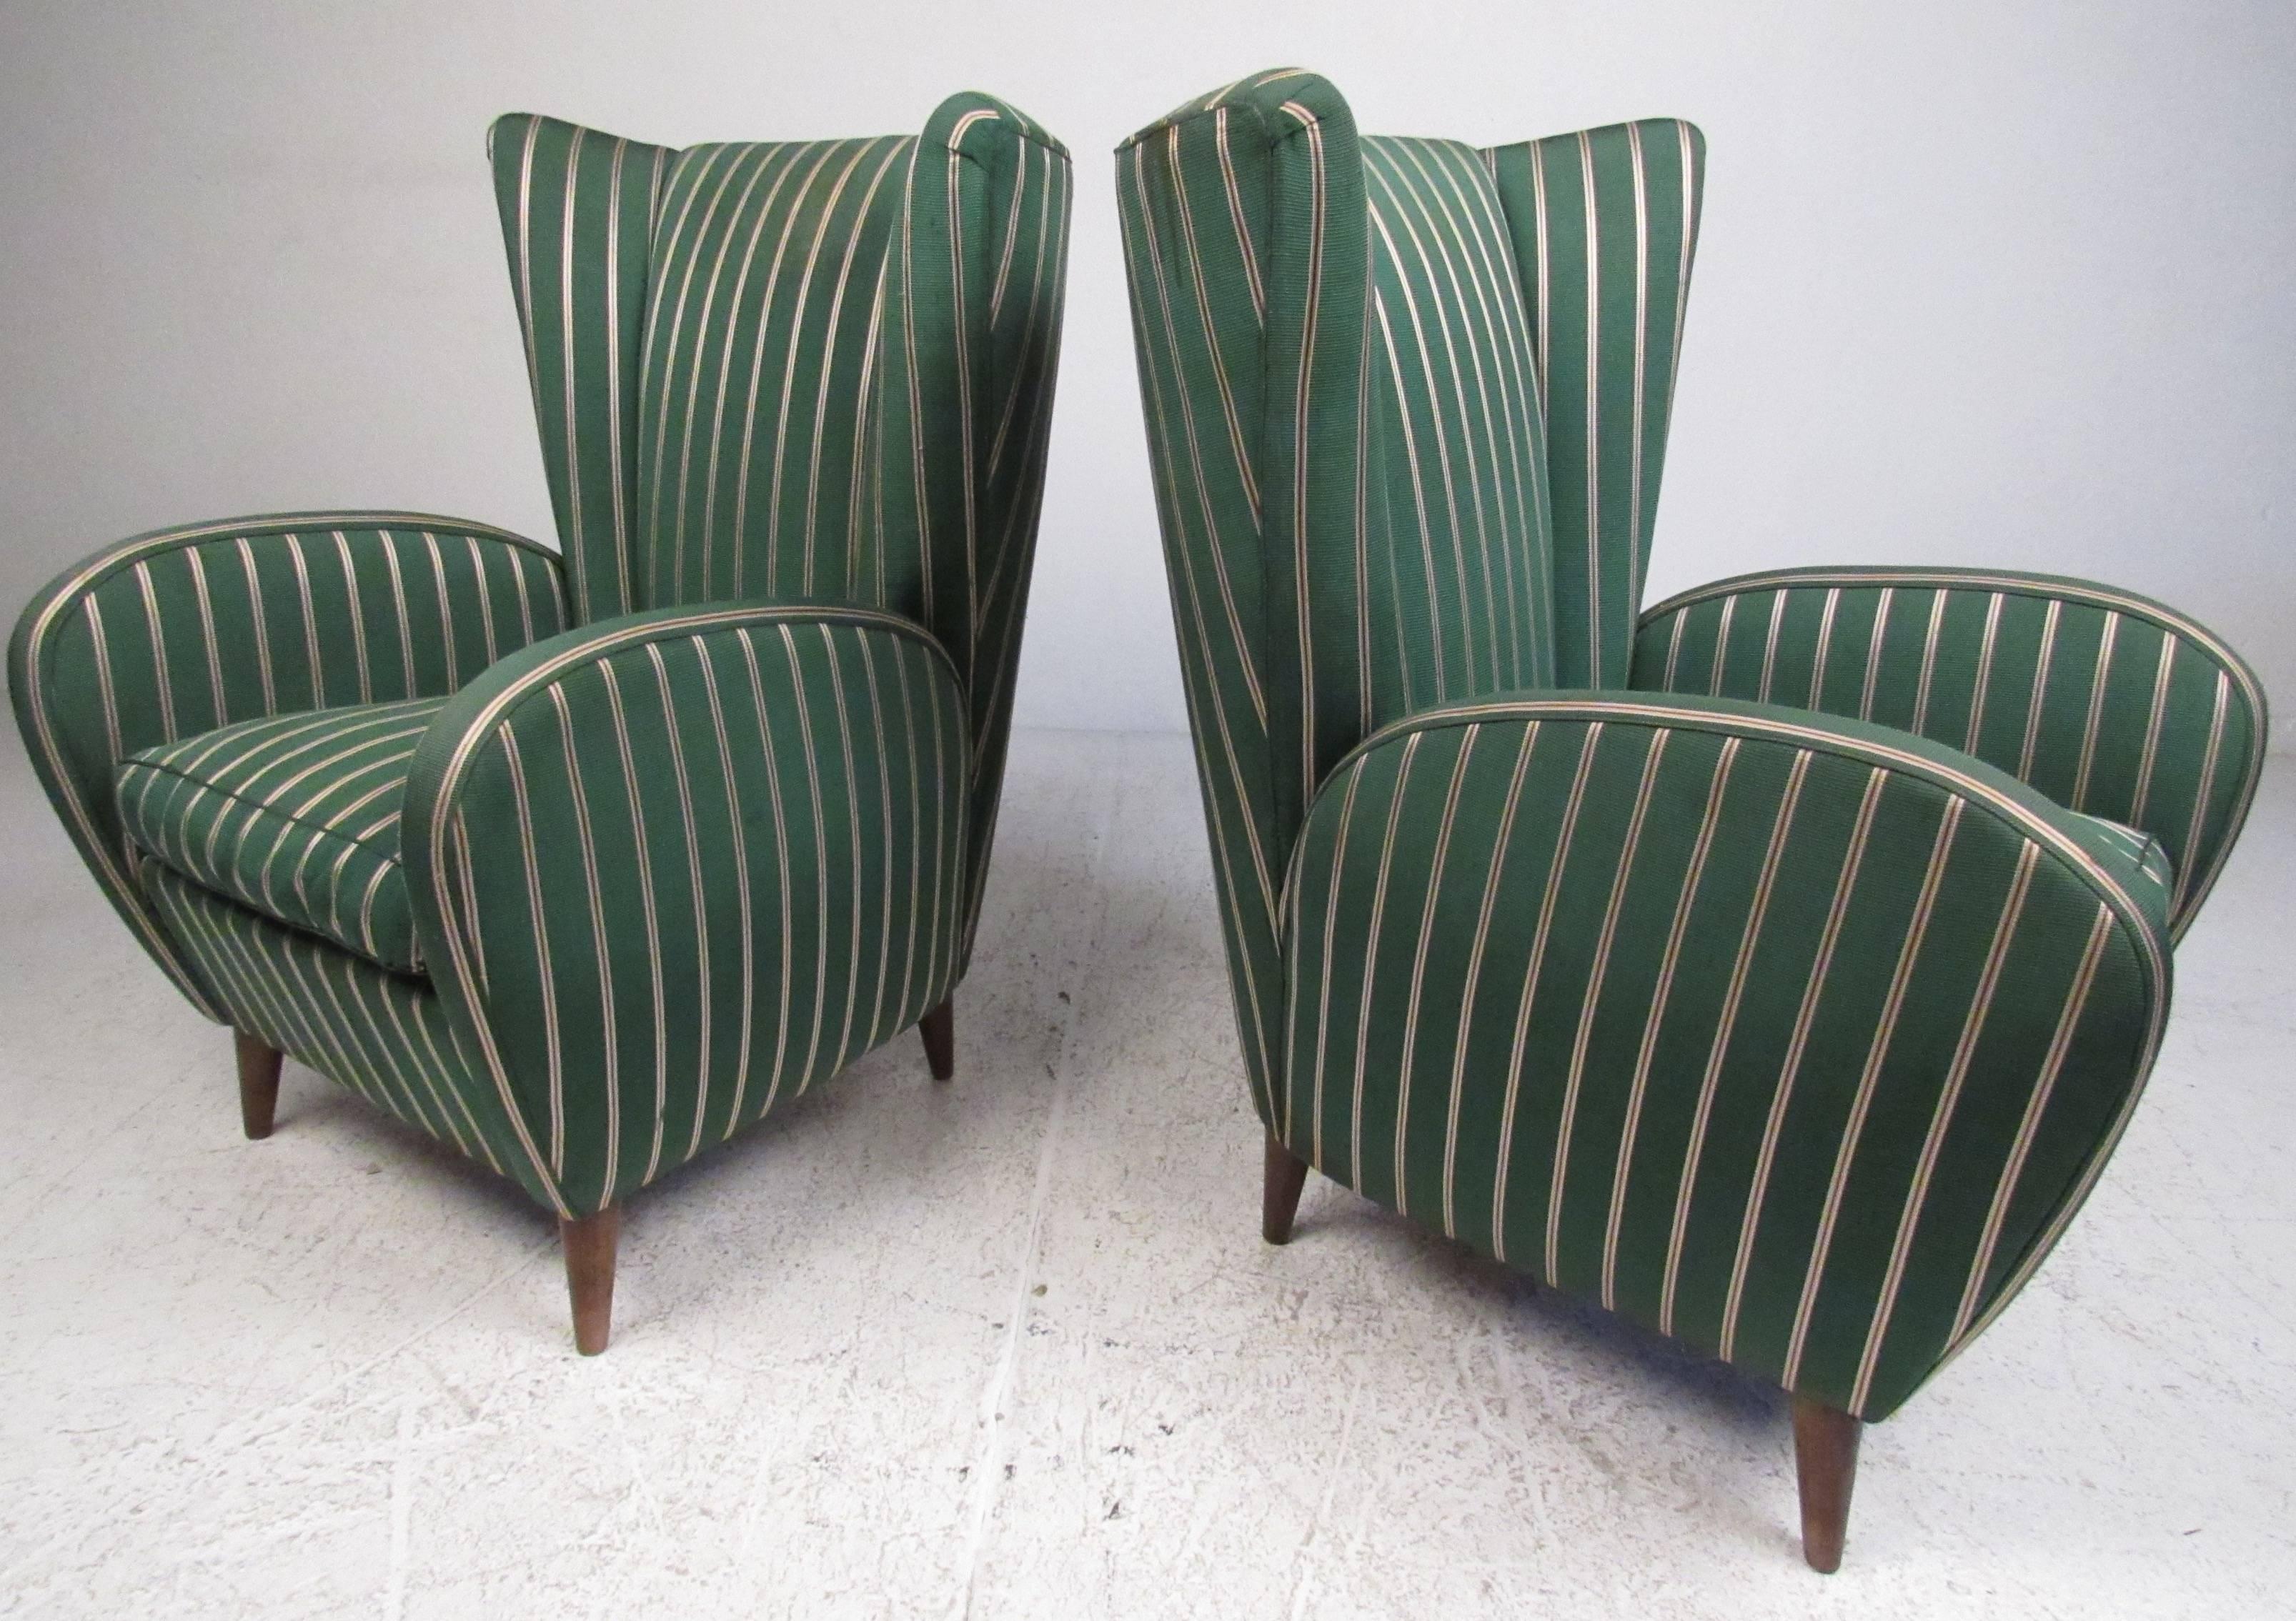 Dramatic pair of sculptural wing back chairs in the manner of Italian designer Paolo Buffa. Exquisite high back seating offers Italian modern elegance in any setting. Please confirm item location (NY or NJ) with dealer.